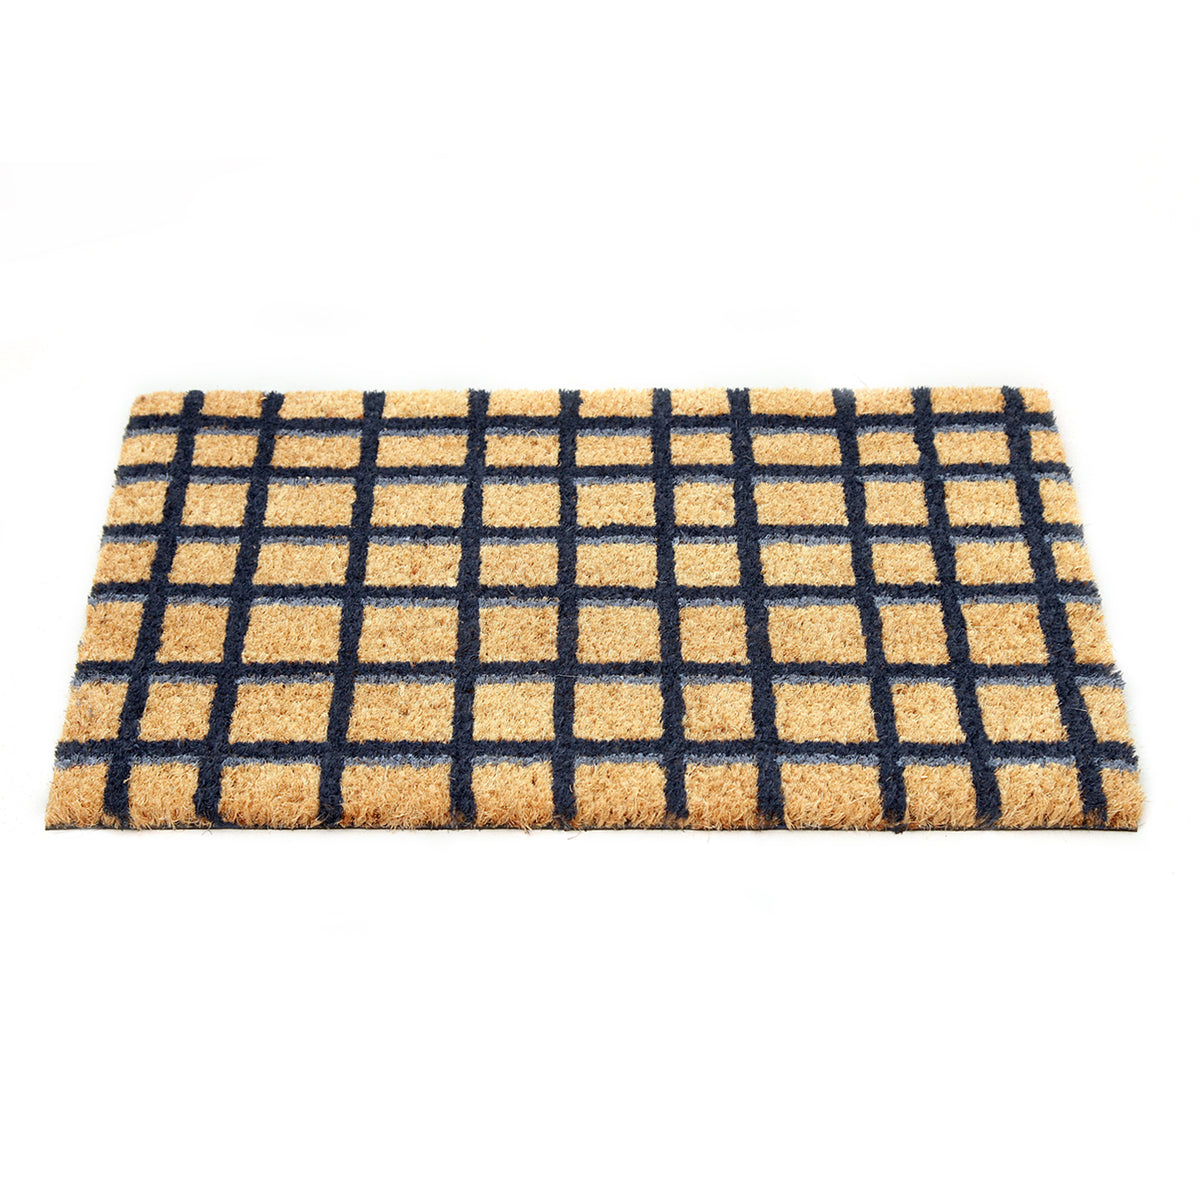 Black and Brown Checked Natural Coir Floor Mat - OnlyMat